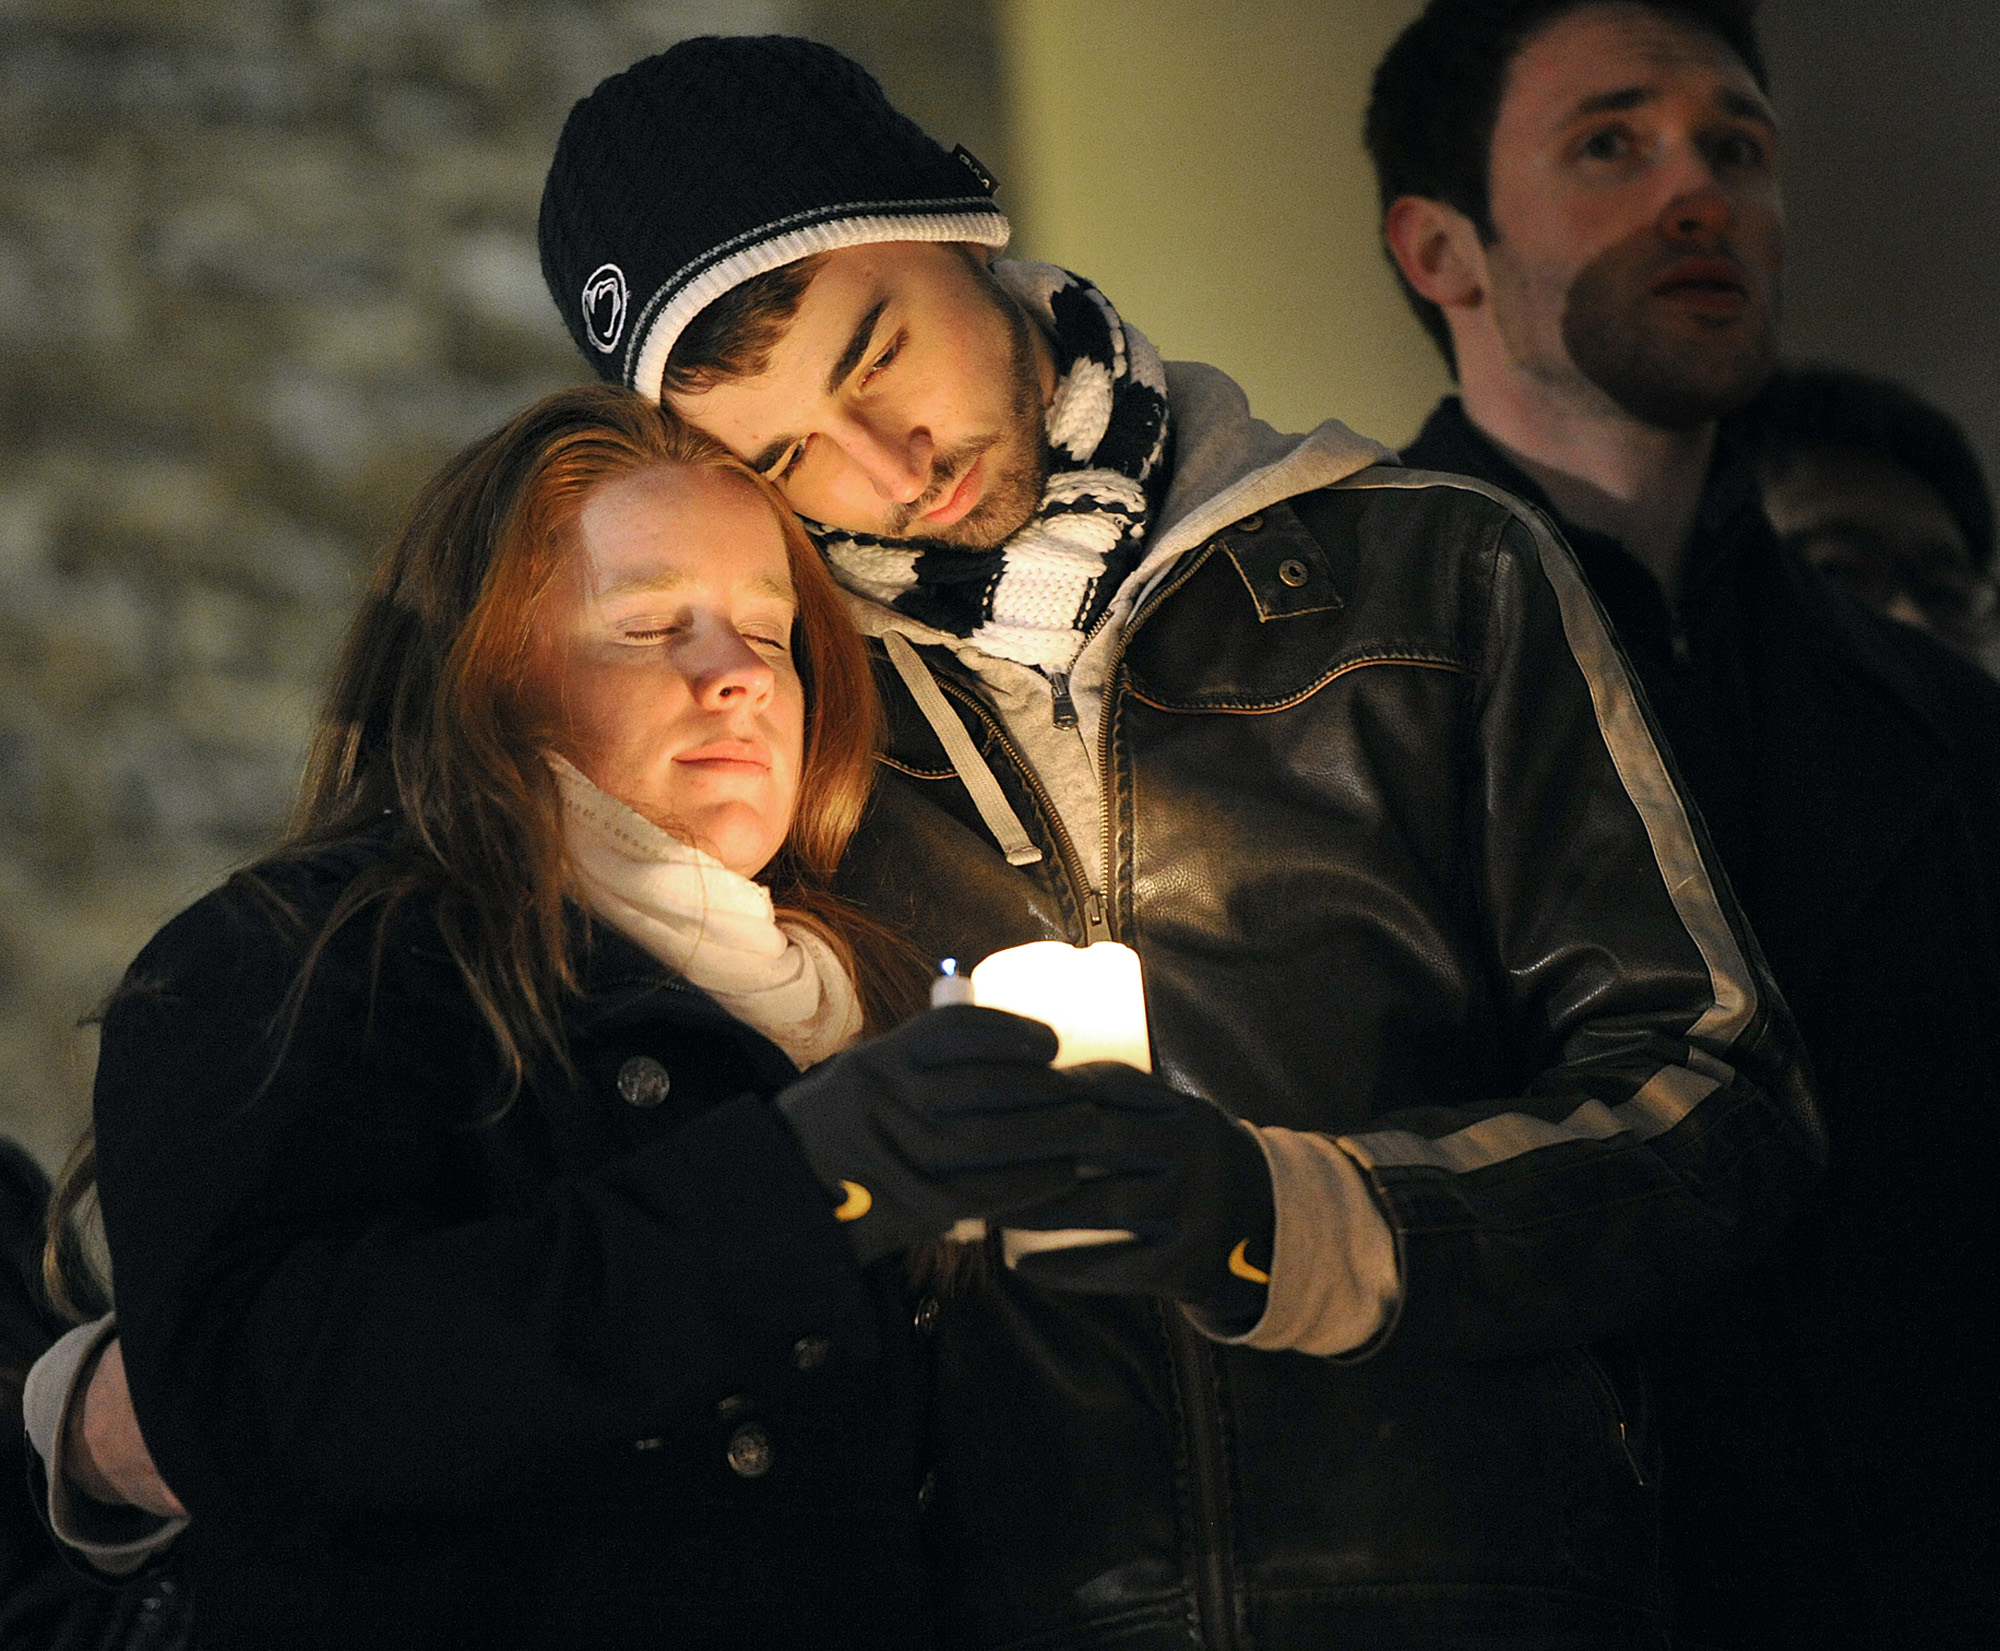  Andrew Adamietz (sophomore-secondary english education) and Katie Knobloch (senior-elementary education), both members of Blue in the Face, embrace on the stairs of Old Main on Sunday night during the candlelit vigil in memorium of Joe Paterno. 